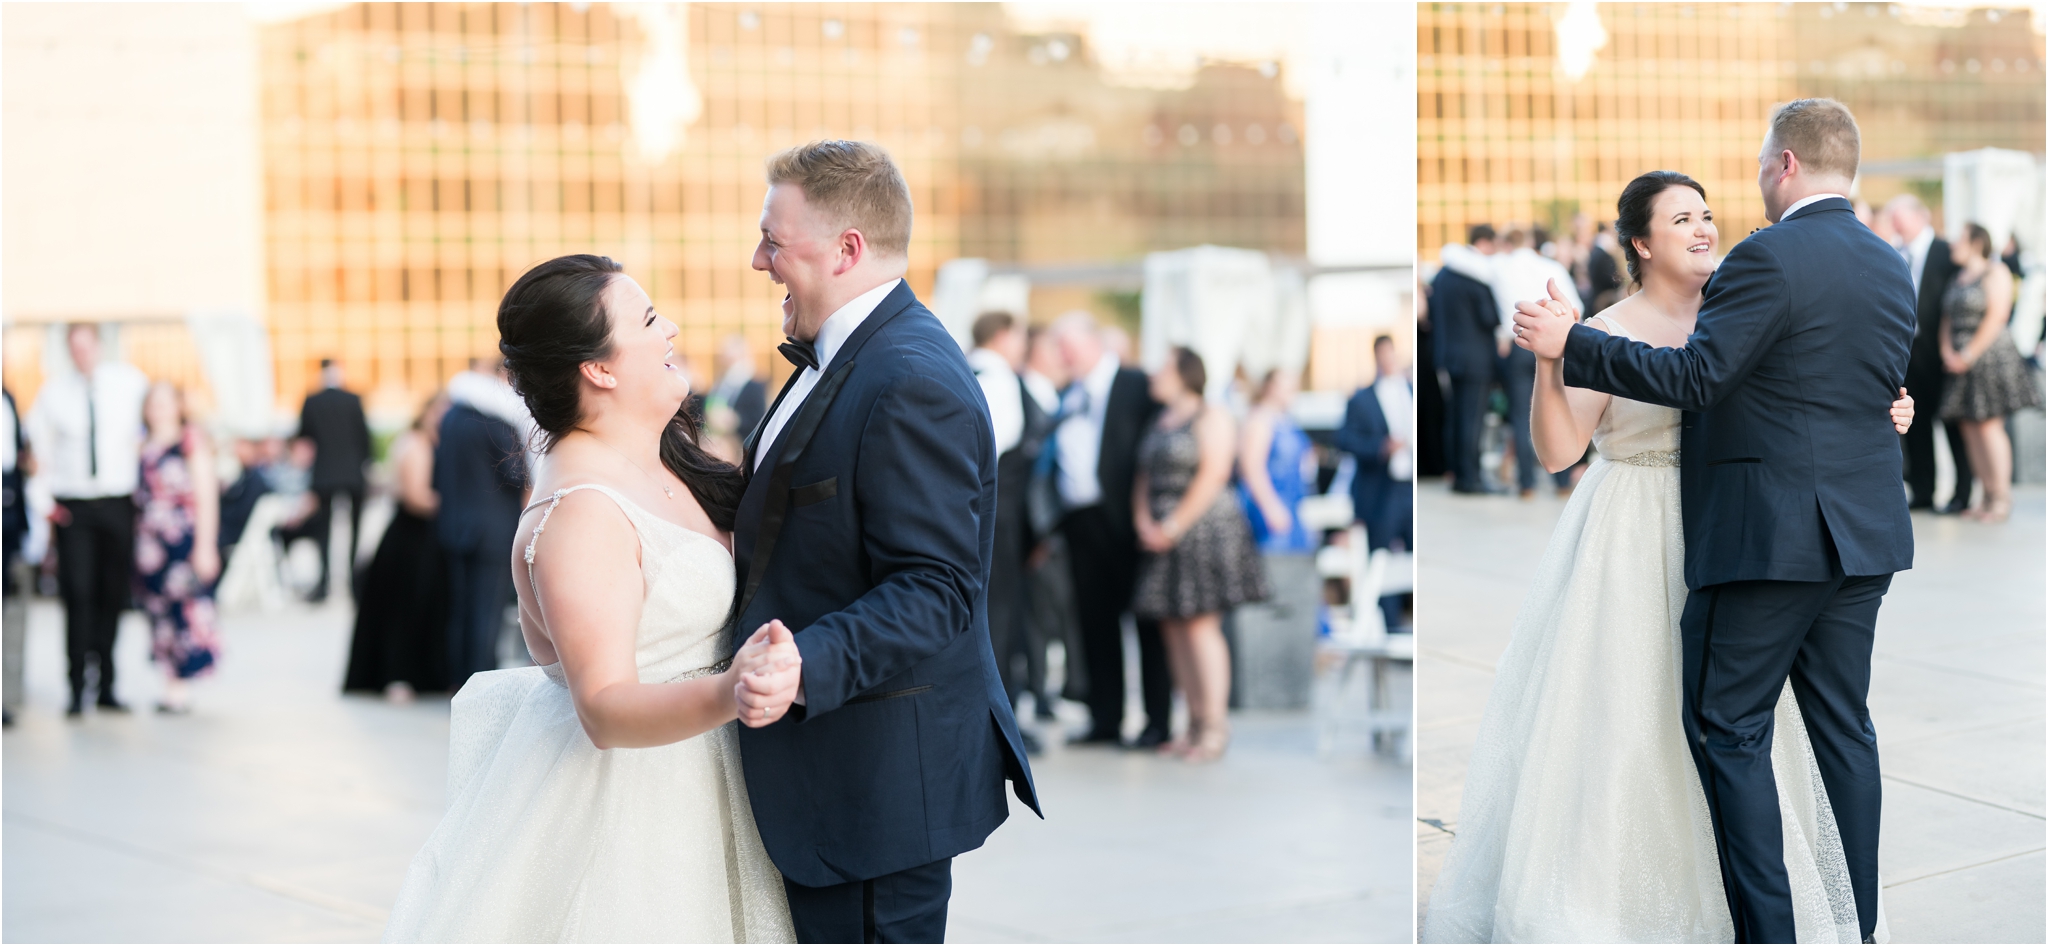 Regions Tower | Sarah and Rachel Wedding Photographers | Indianapolis, IN | Rooftop First Dance during Sunset